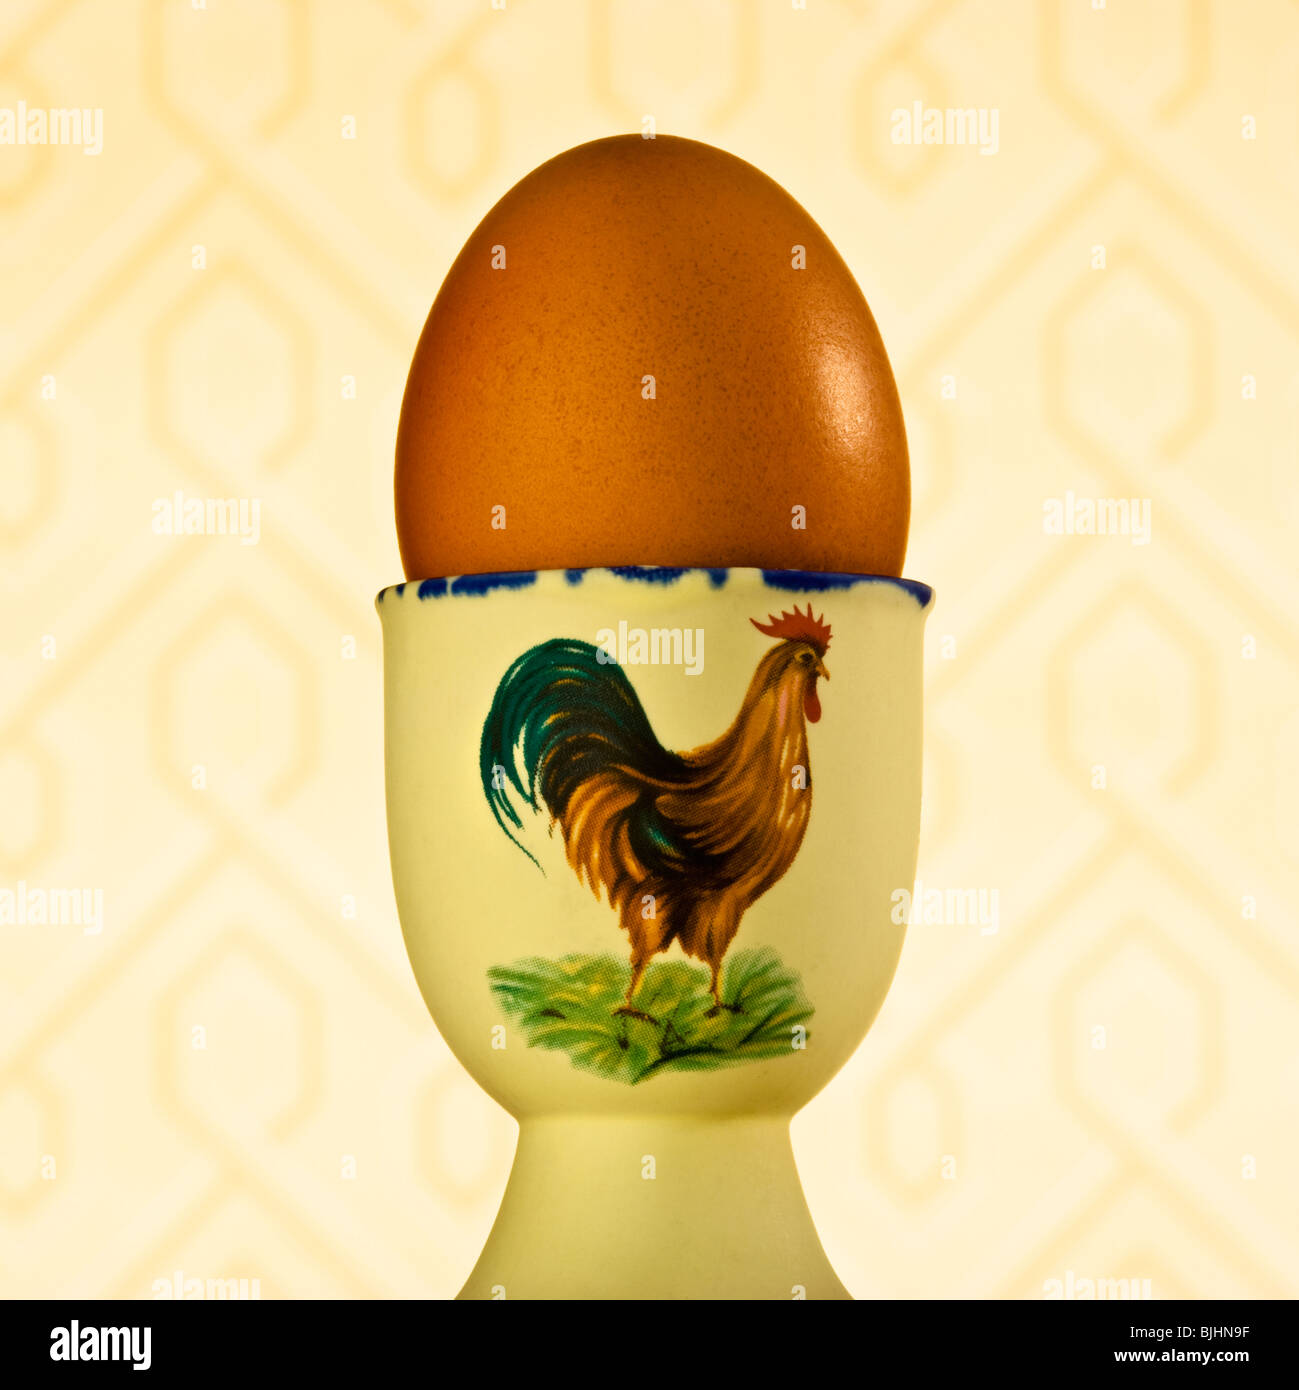 Egg in cup Stock Photo